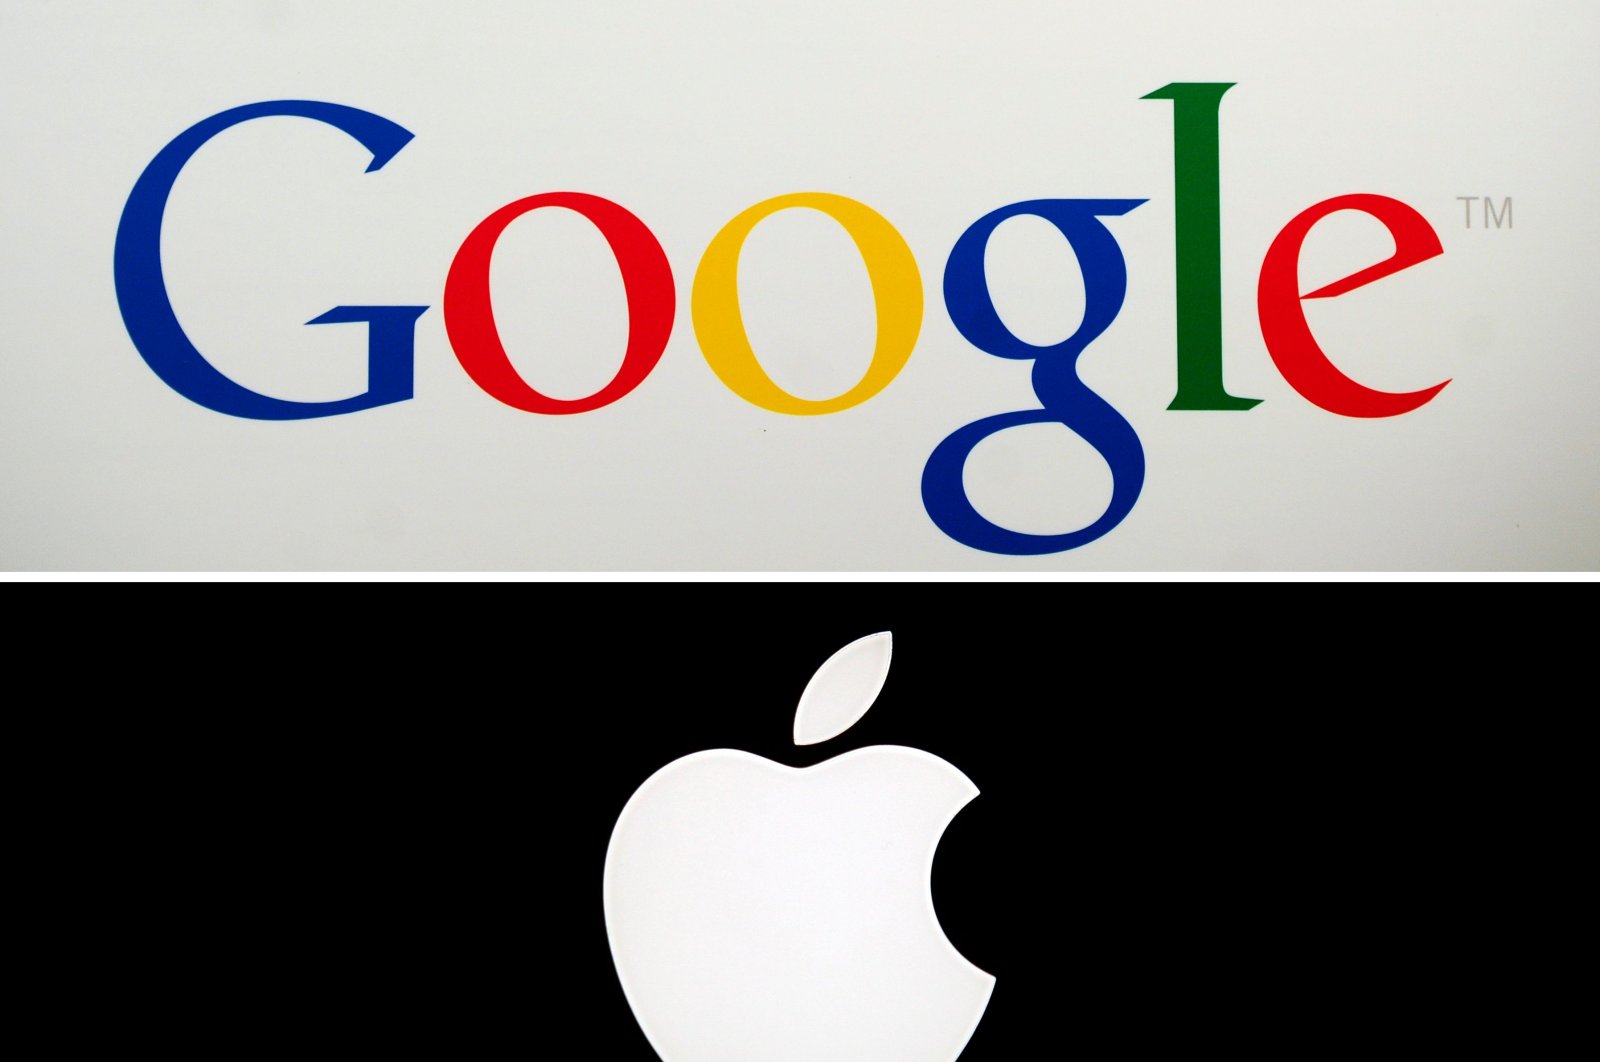  In this combo file photo taken on May 17, 2014, shows Google's logo (top) in New York on May 21, 2012, and Apple's logo in Paris on January 27, 2010. (AFP Photo)